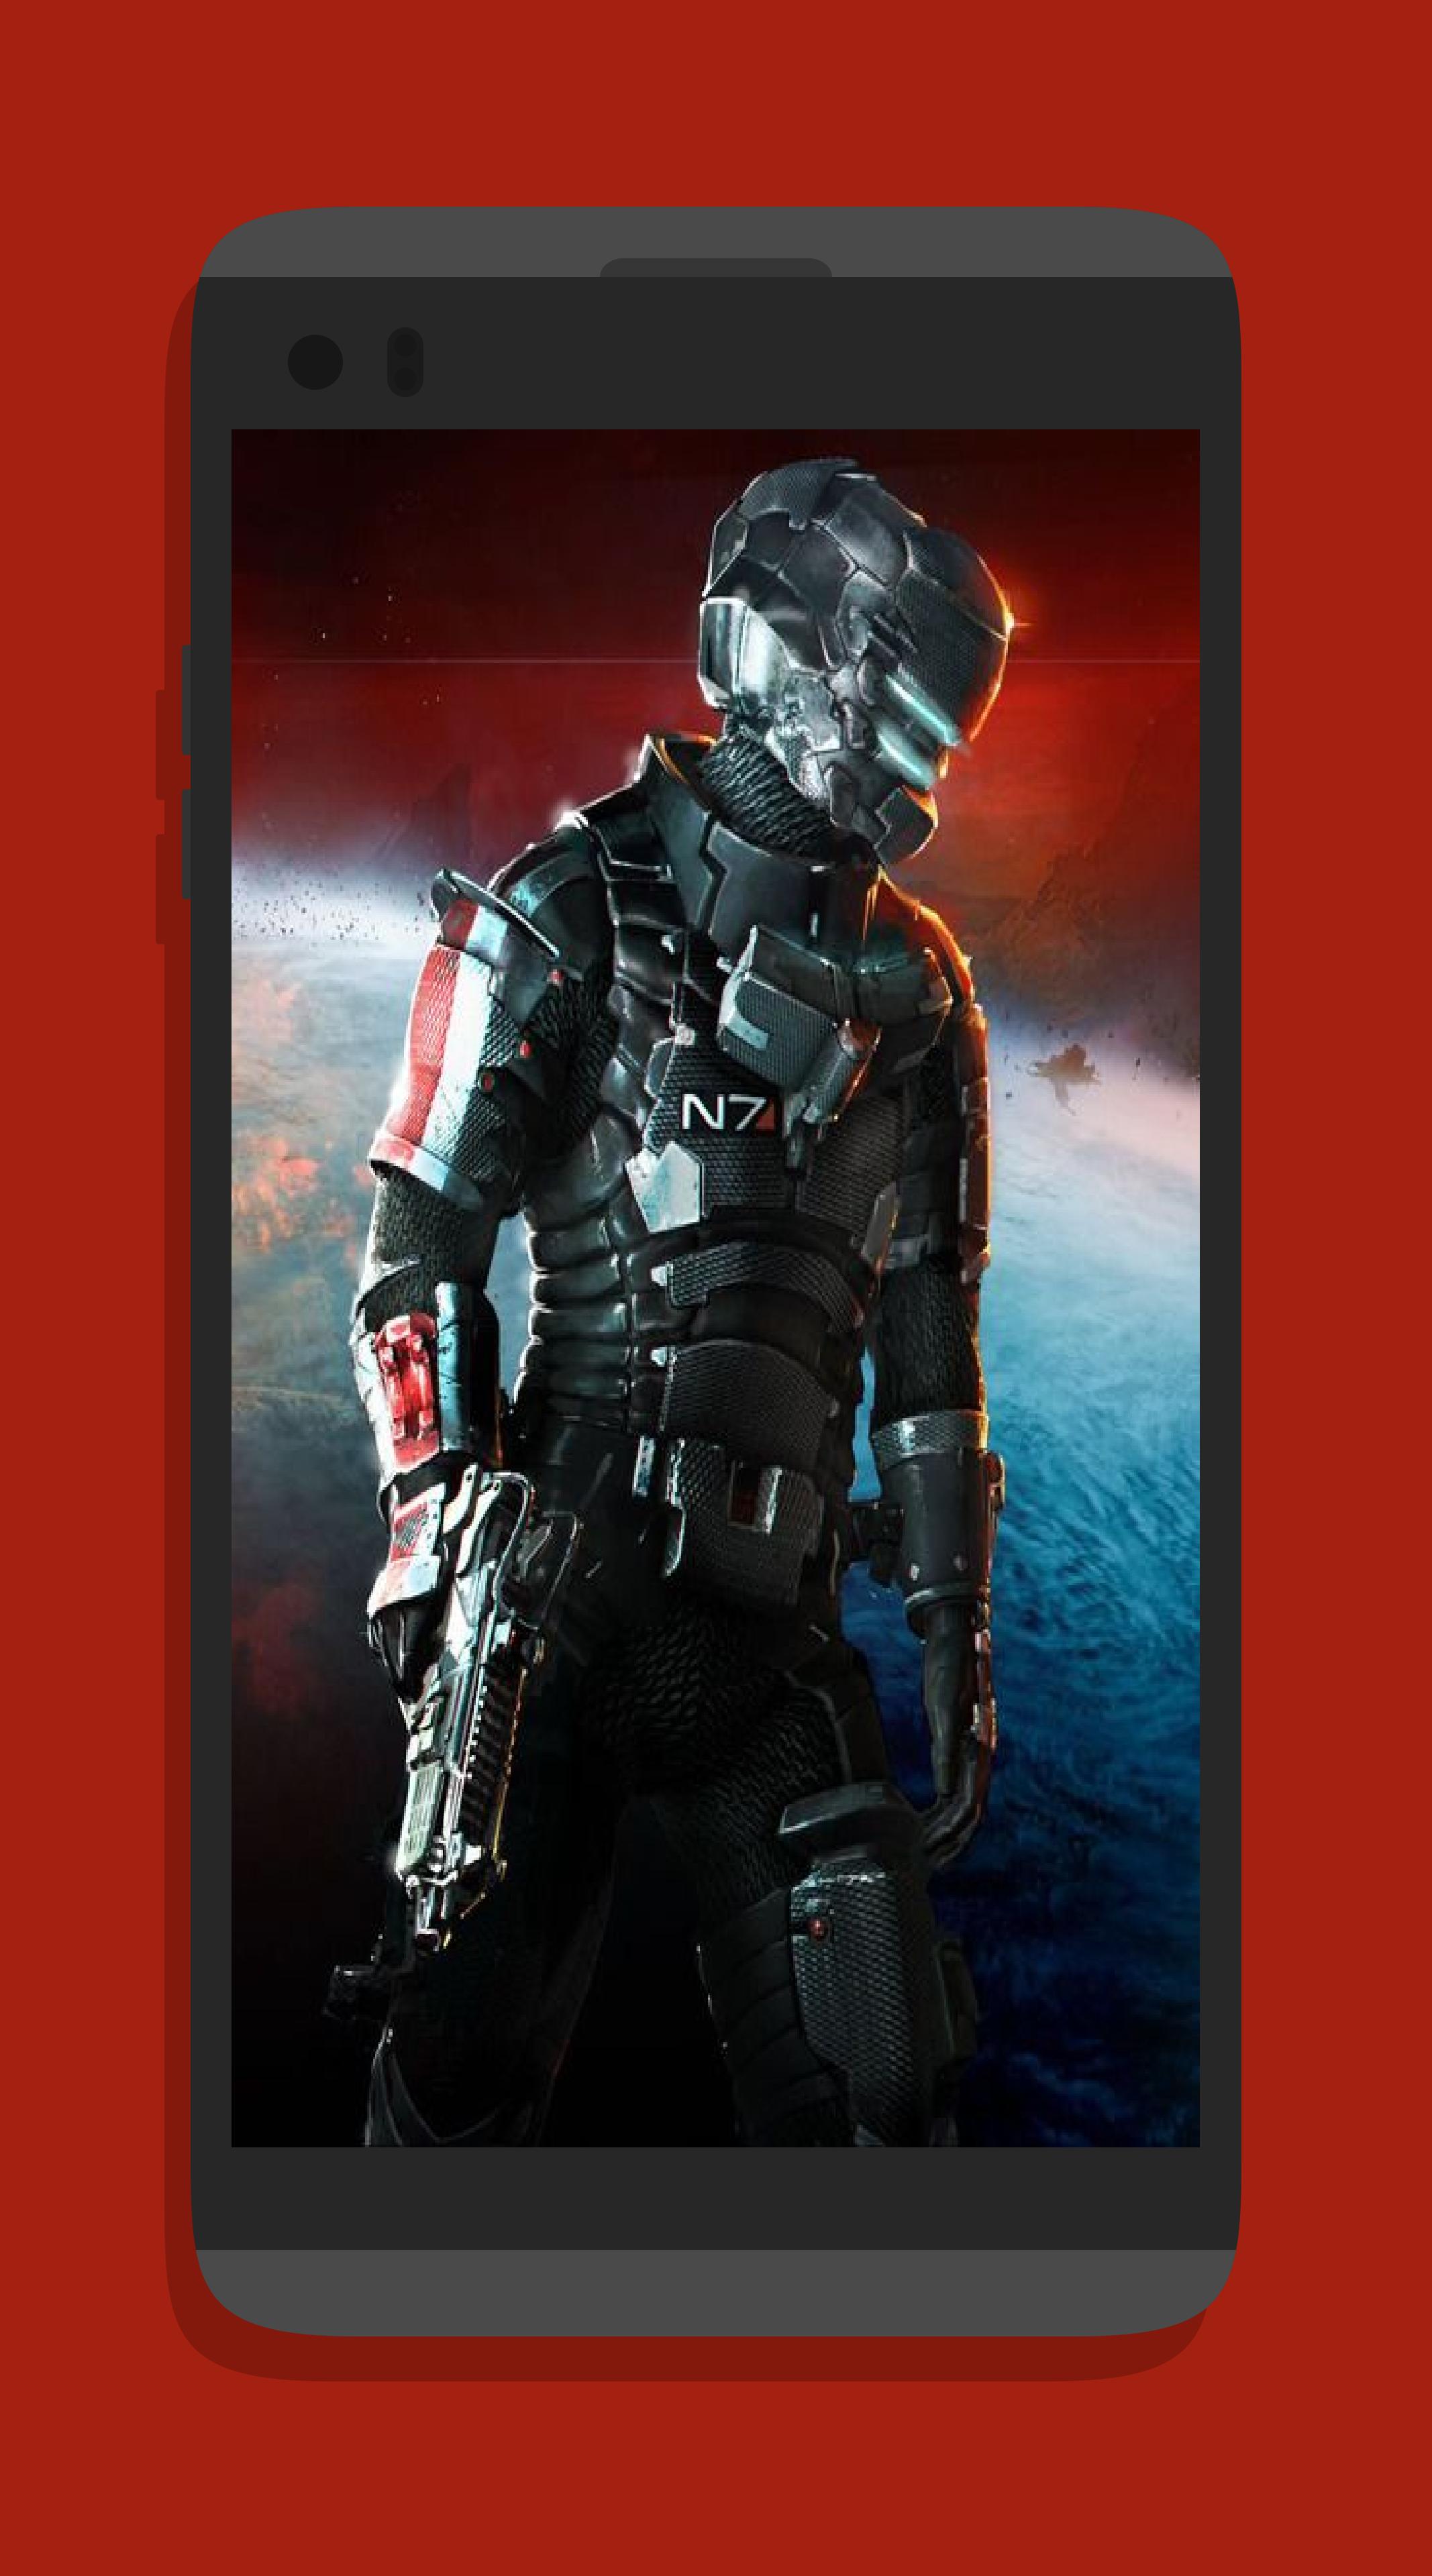 Wiki For Mass Effect Andromeda For Android Apk Download